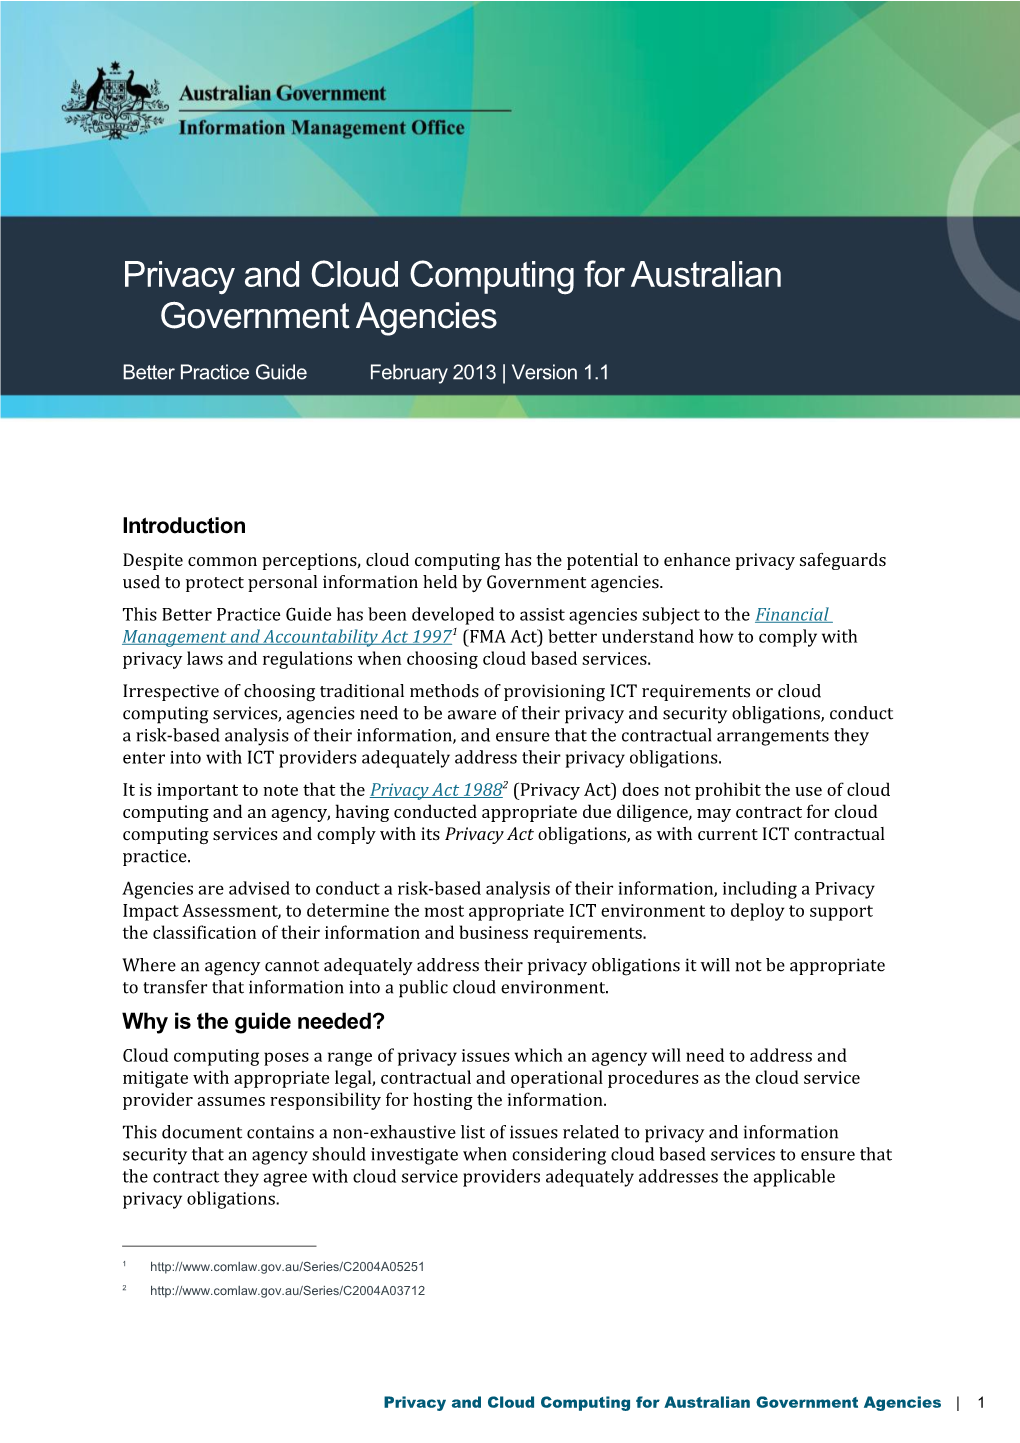 Privacy and Cloud Computing for Australian Government Agencies